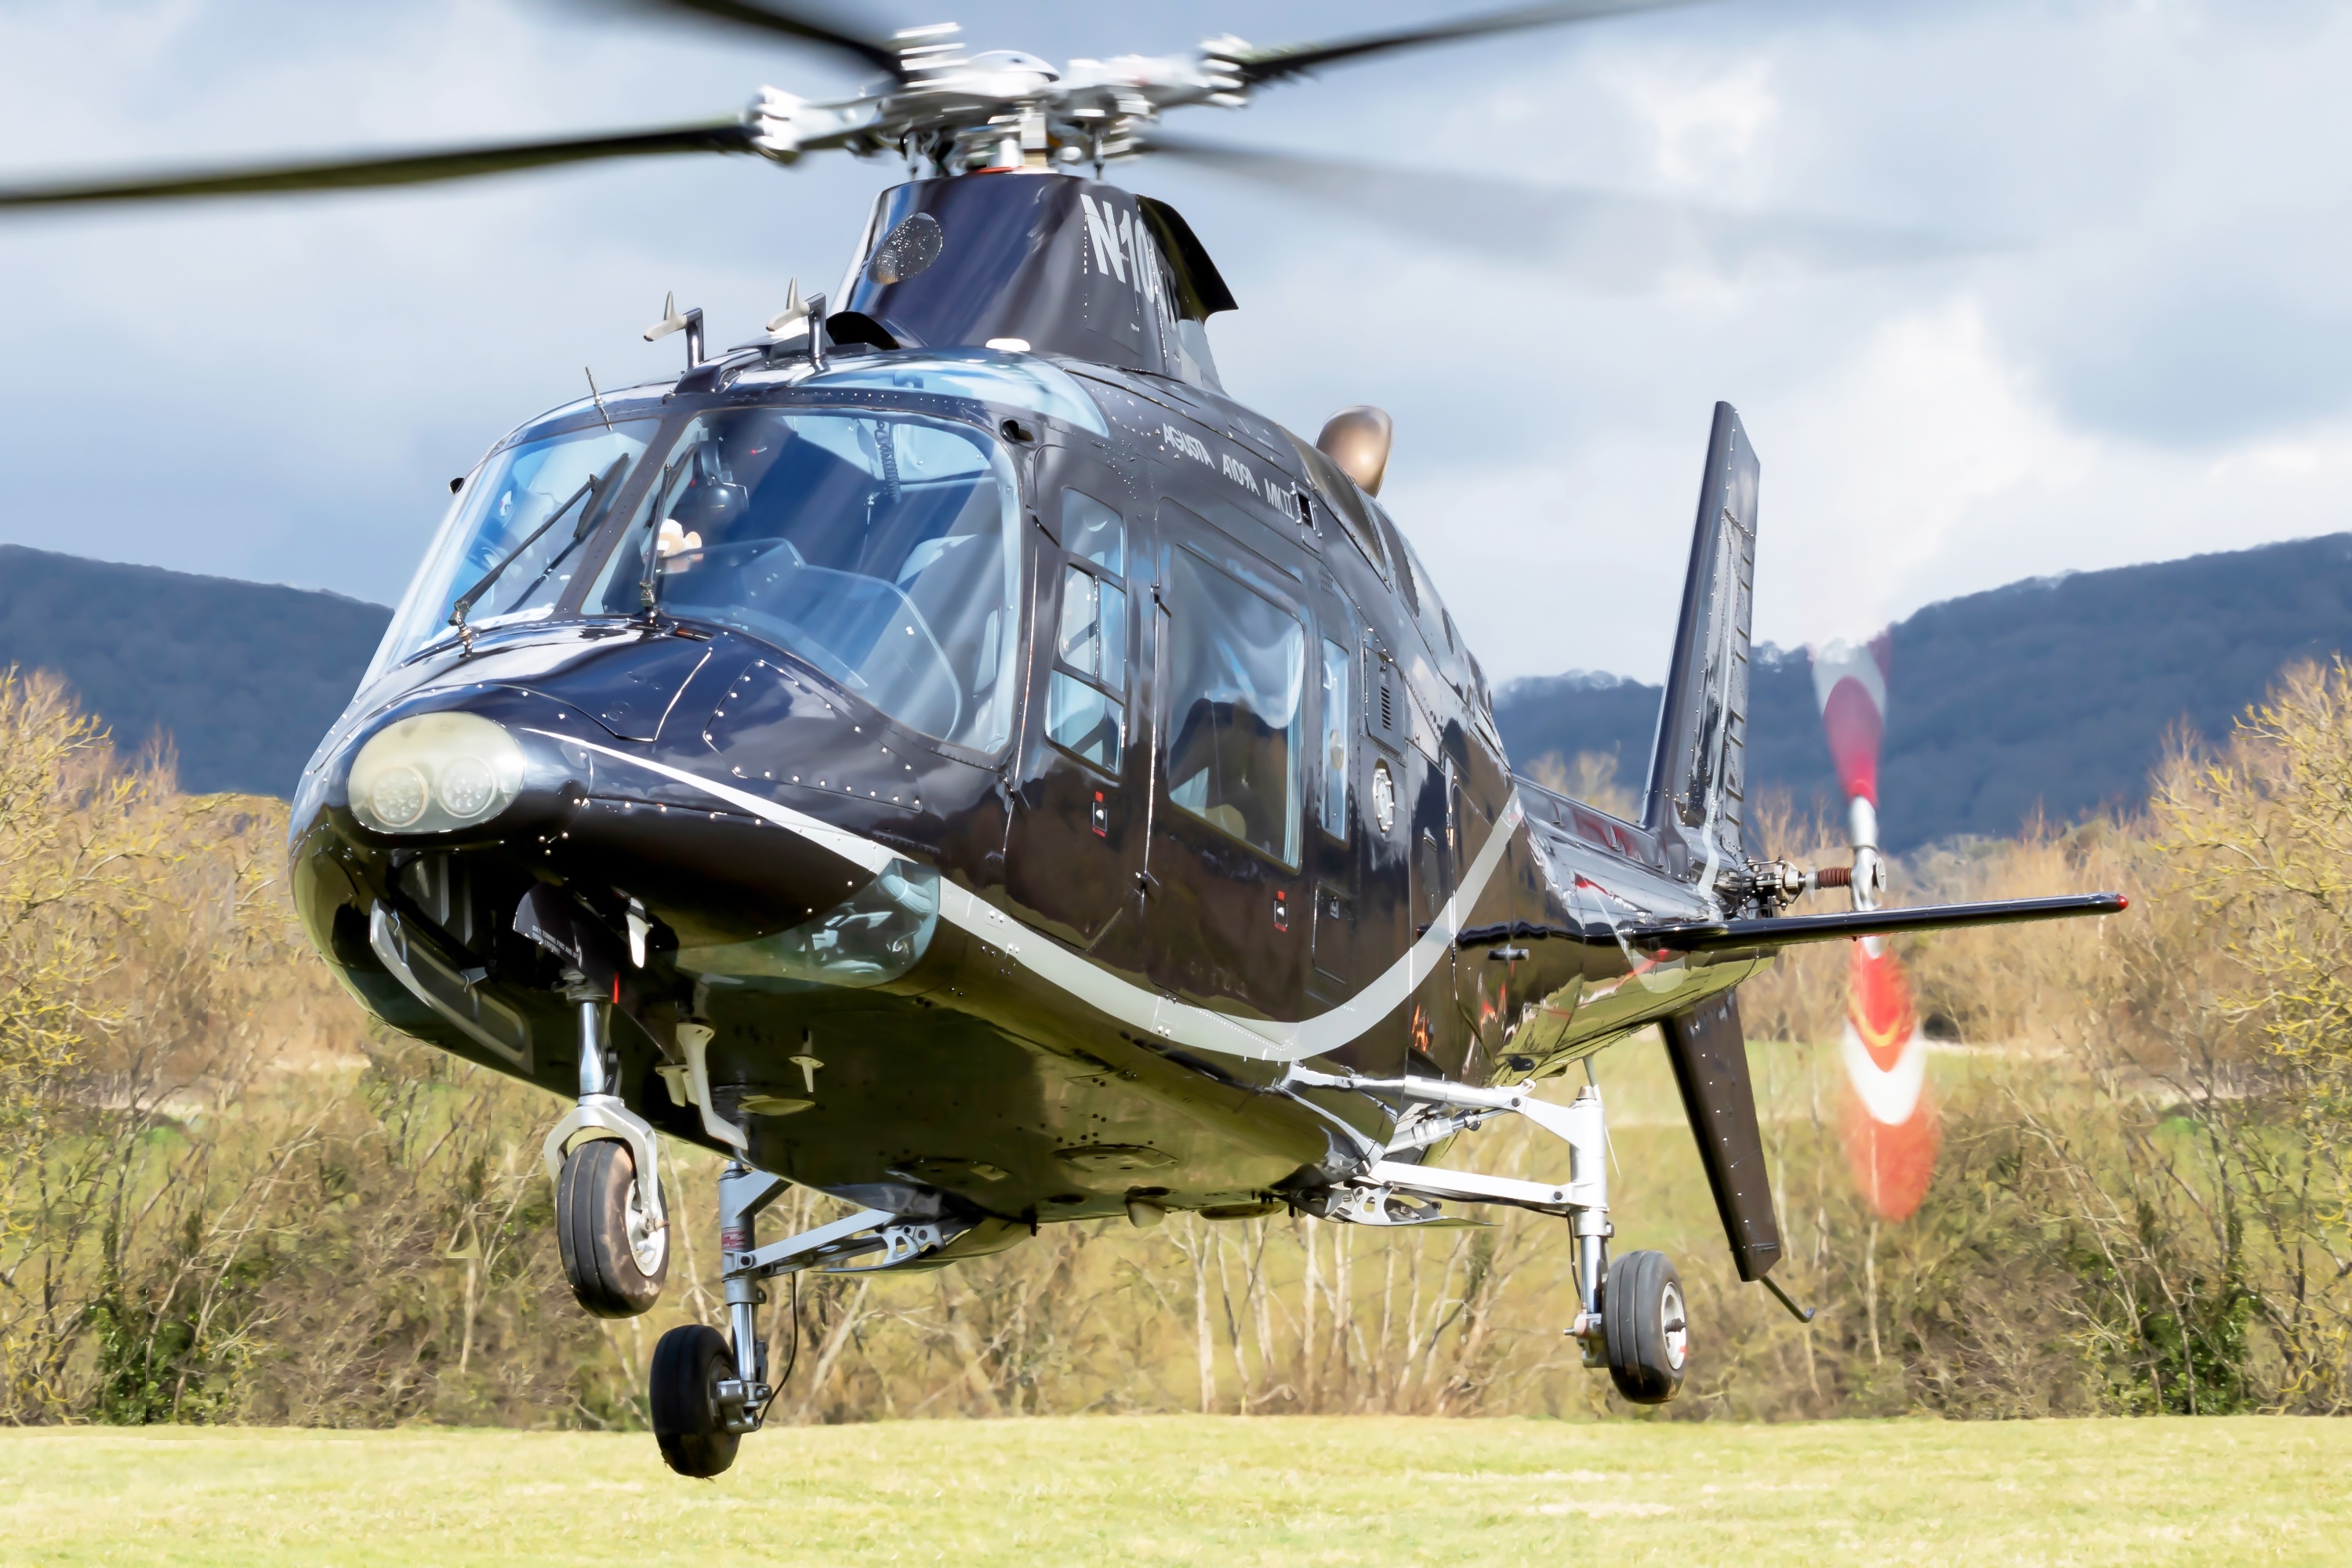 Allaero acquire AW109 and expand helicopter business